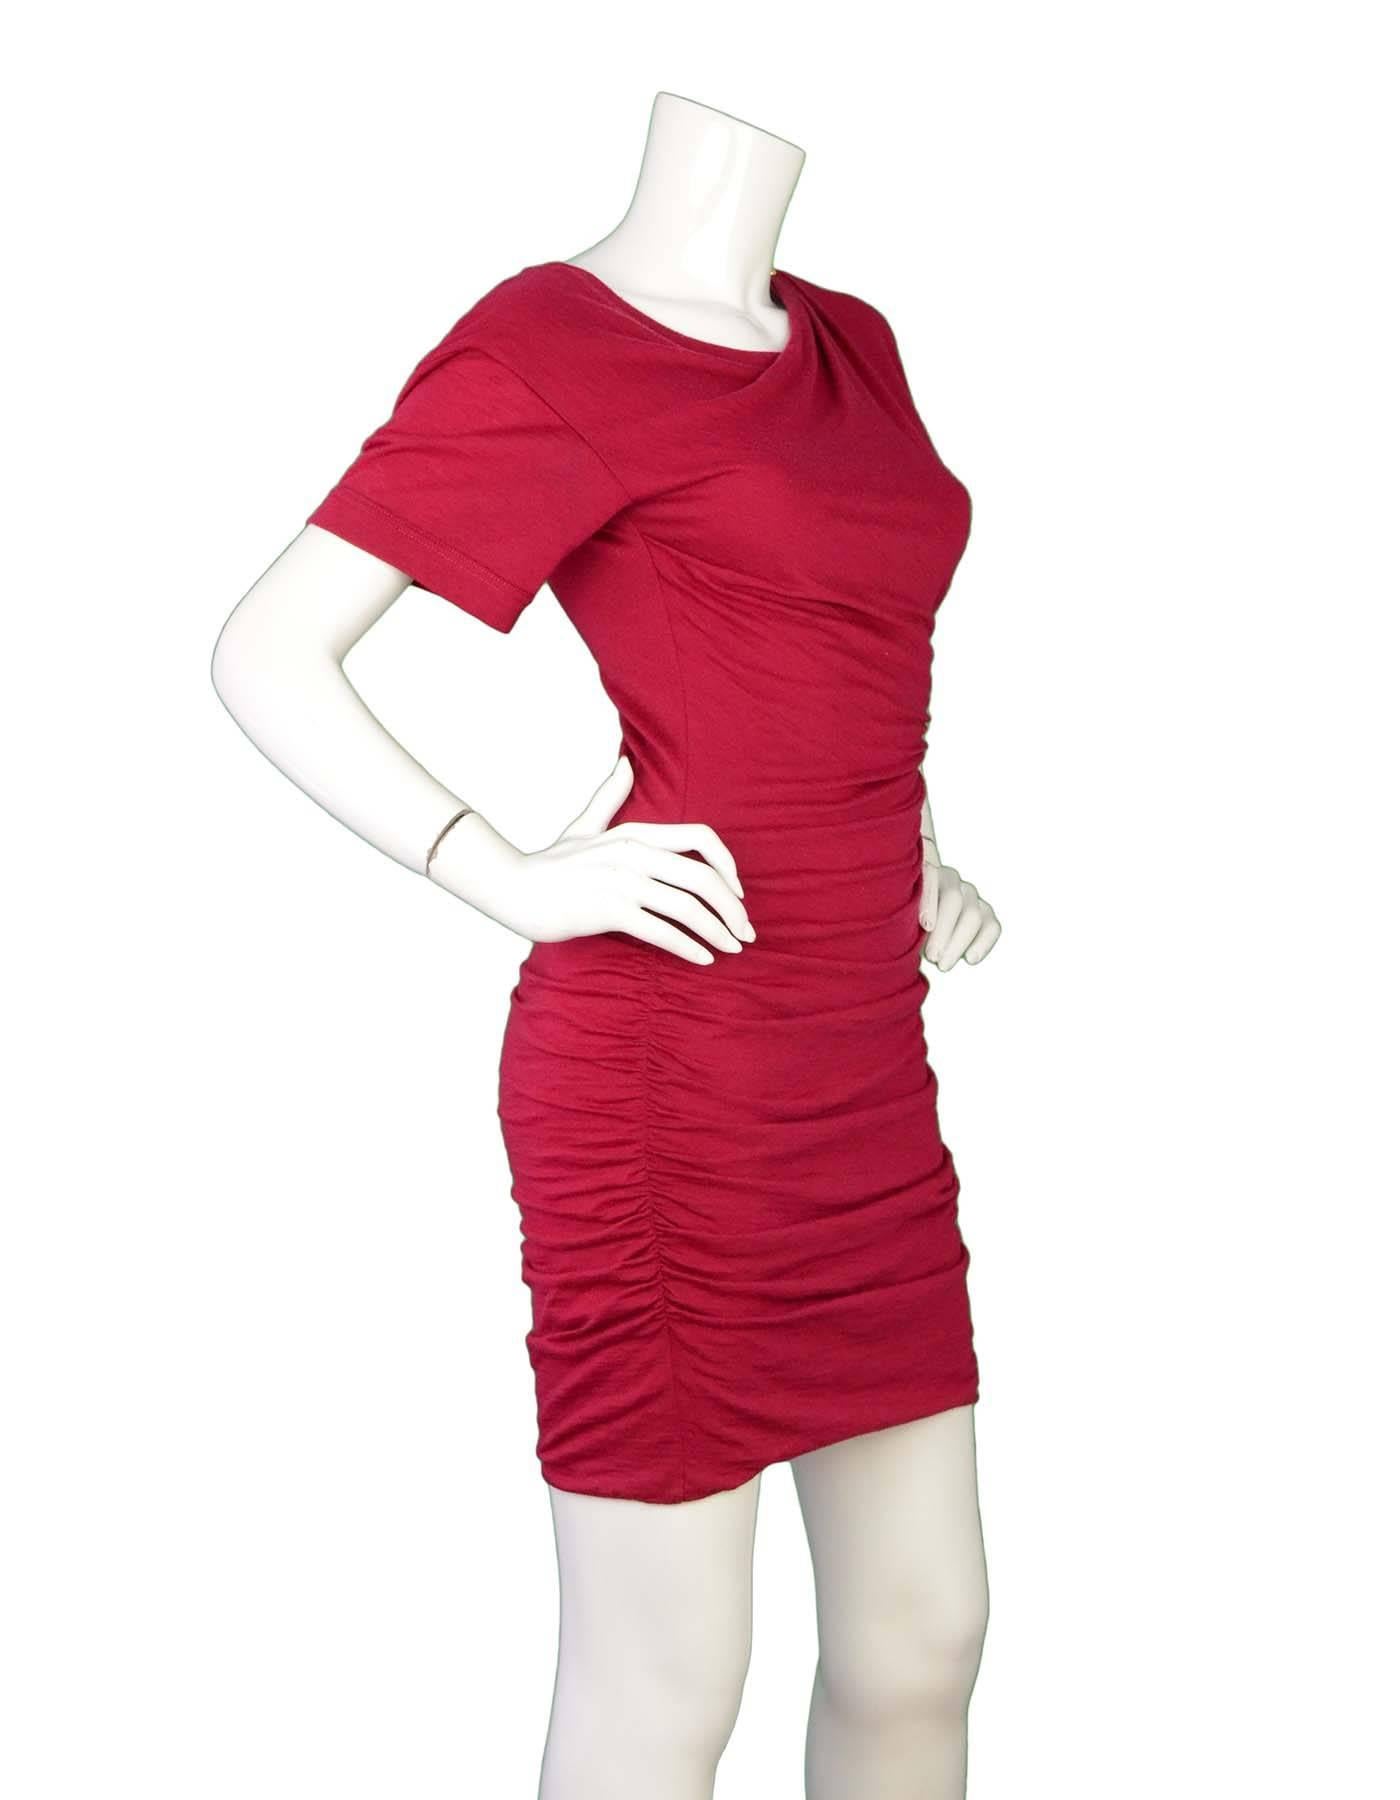 Louis Vuitton Red Wool T-Shirt Dress Sz S
Features ruching throughout and draping at neckline 

Made In: Italy
Color: Raspberry red
Composition: 90% Wool, 10% Polyamide
Lining: Black silk
Closure/Opening: Pull over
Overall Condition: